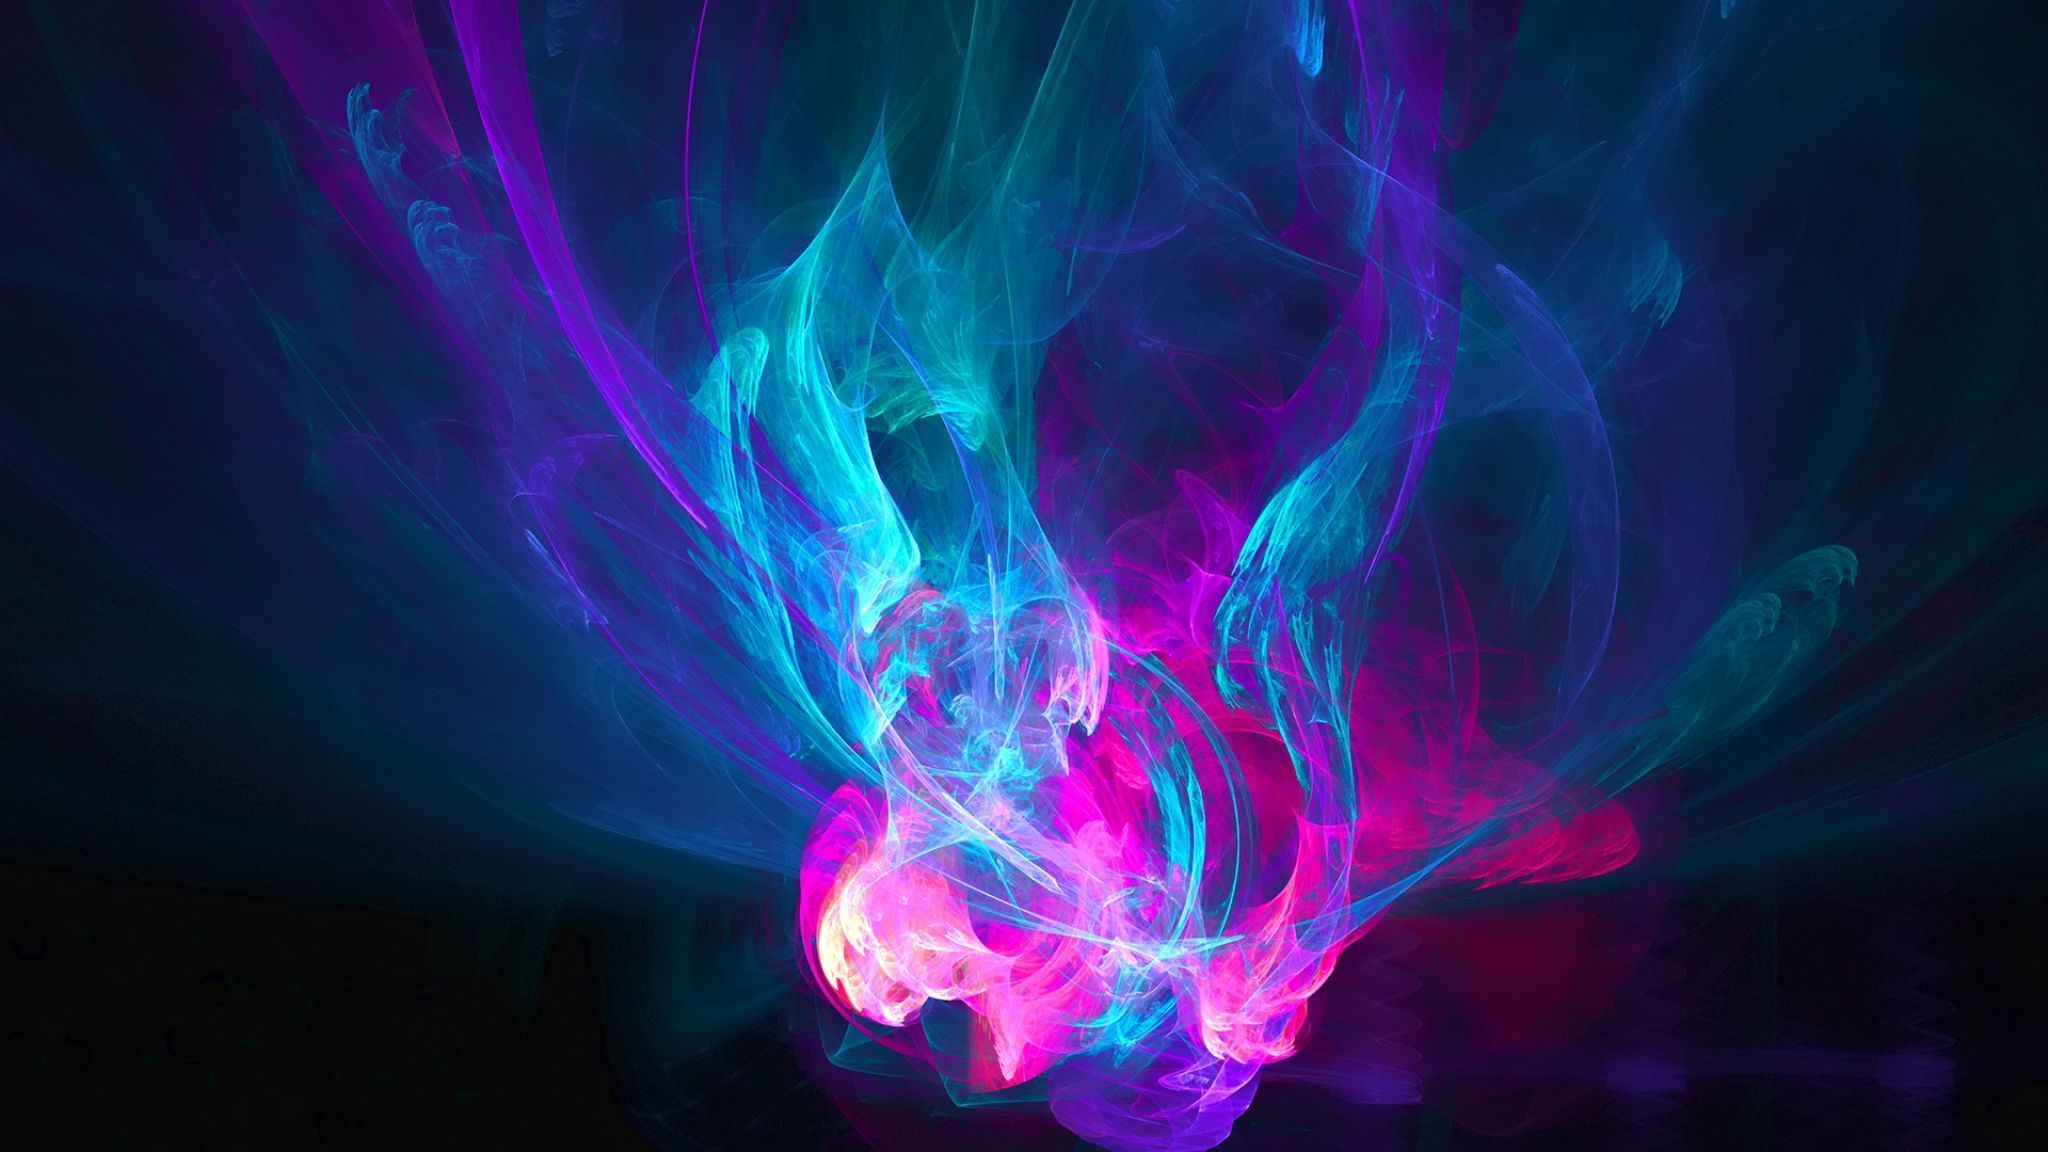 Download Wallpaper 2048x1152 Abstraction, Light, Pink, Blue ...